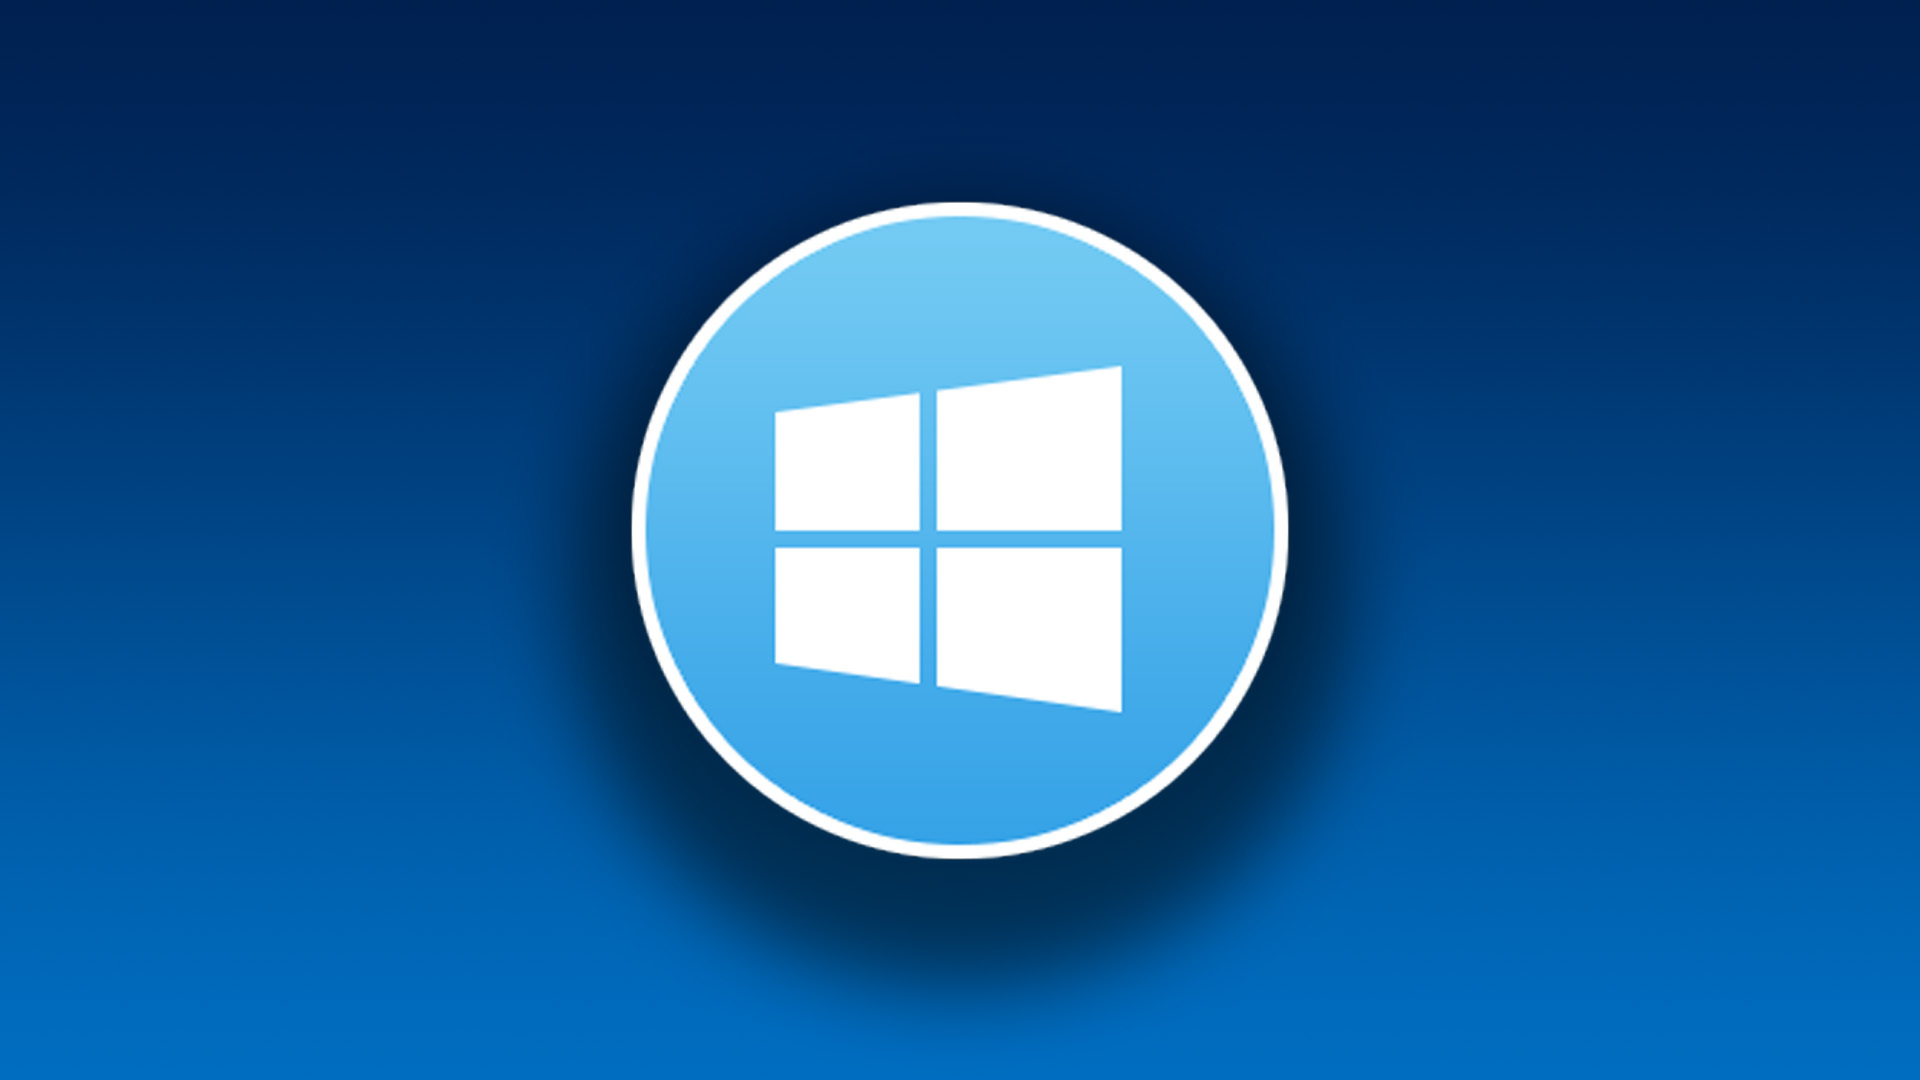 The New Operating System Windows Wallpaper And Image